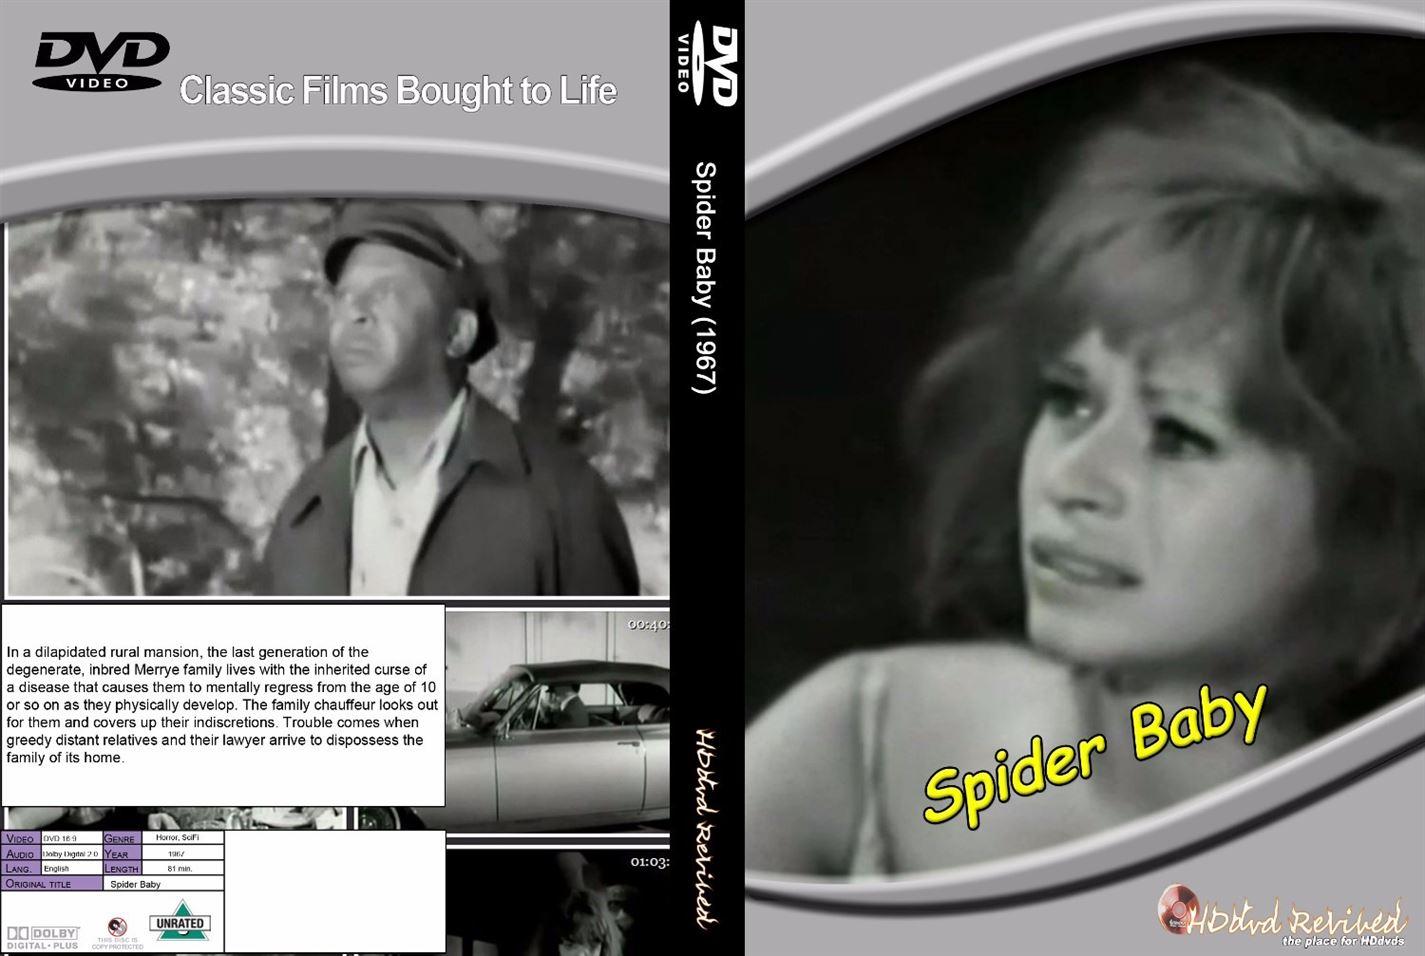 Spider Baby (1967) - DVD - (HDDVD-Revived) - NEW